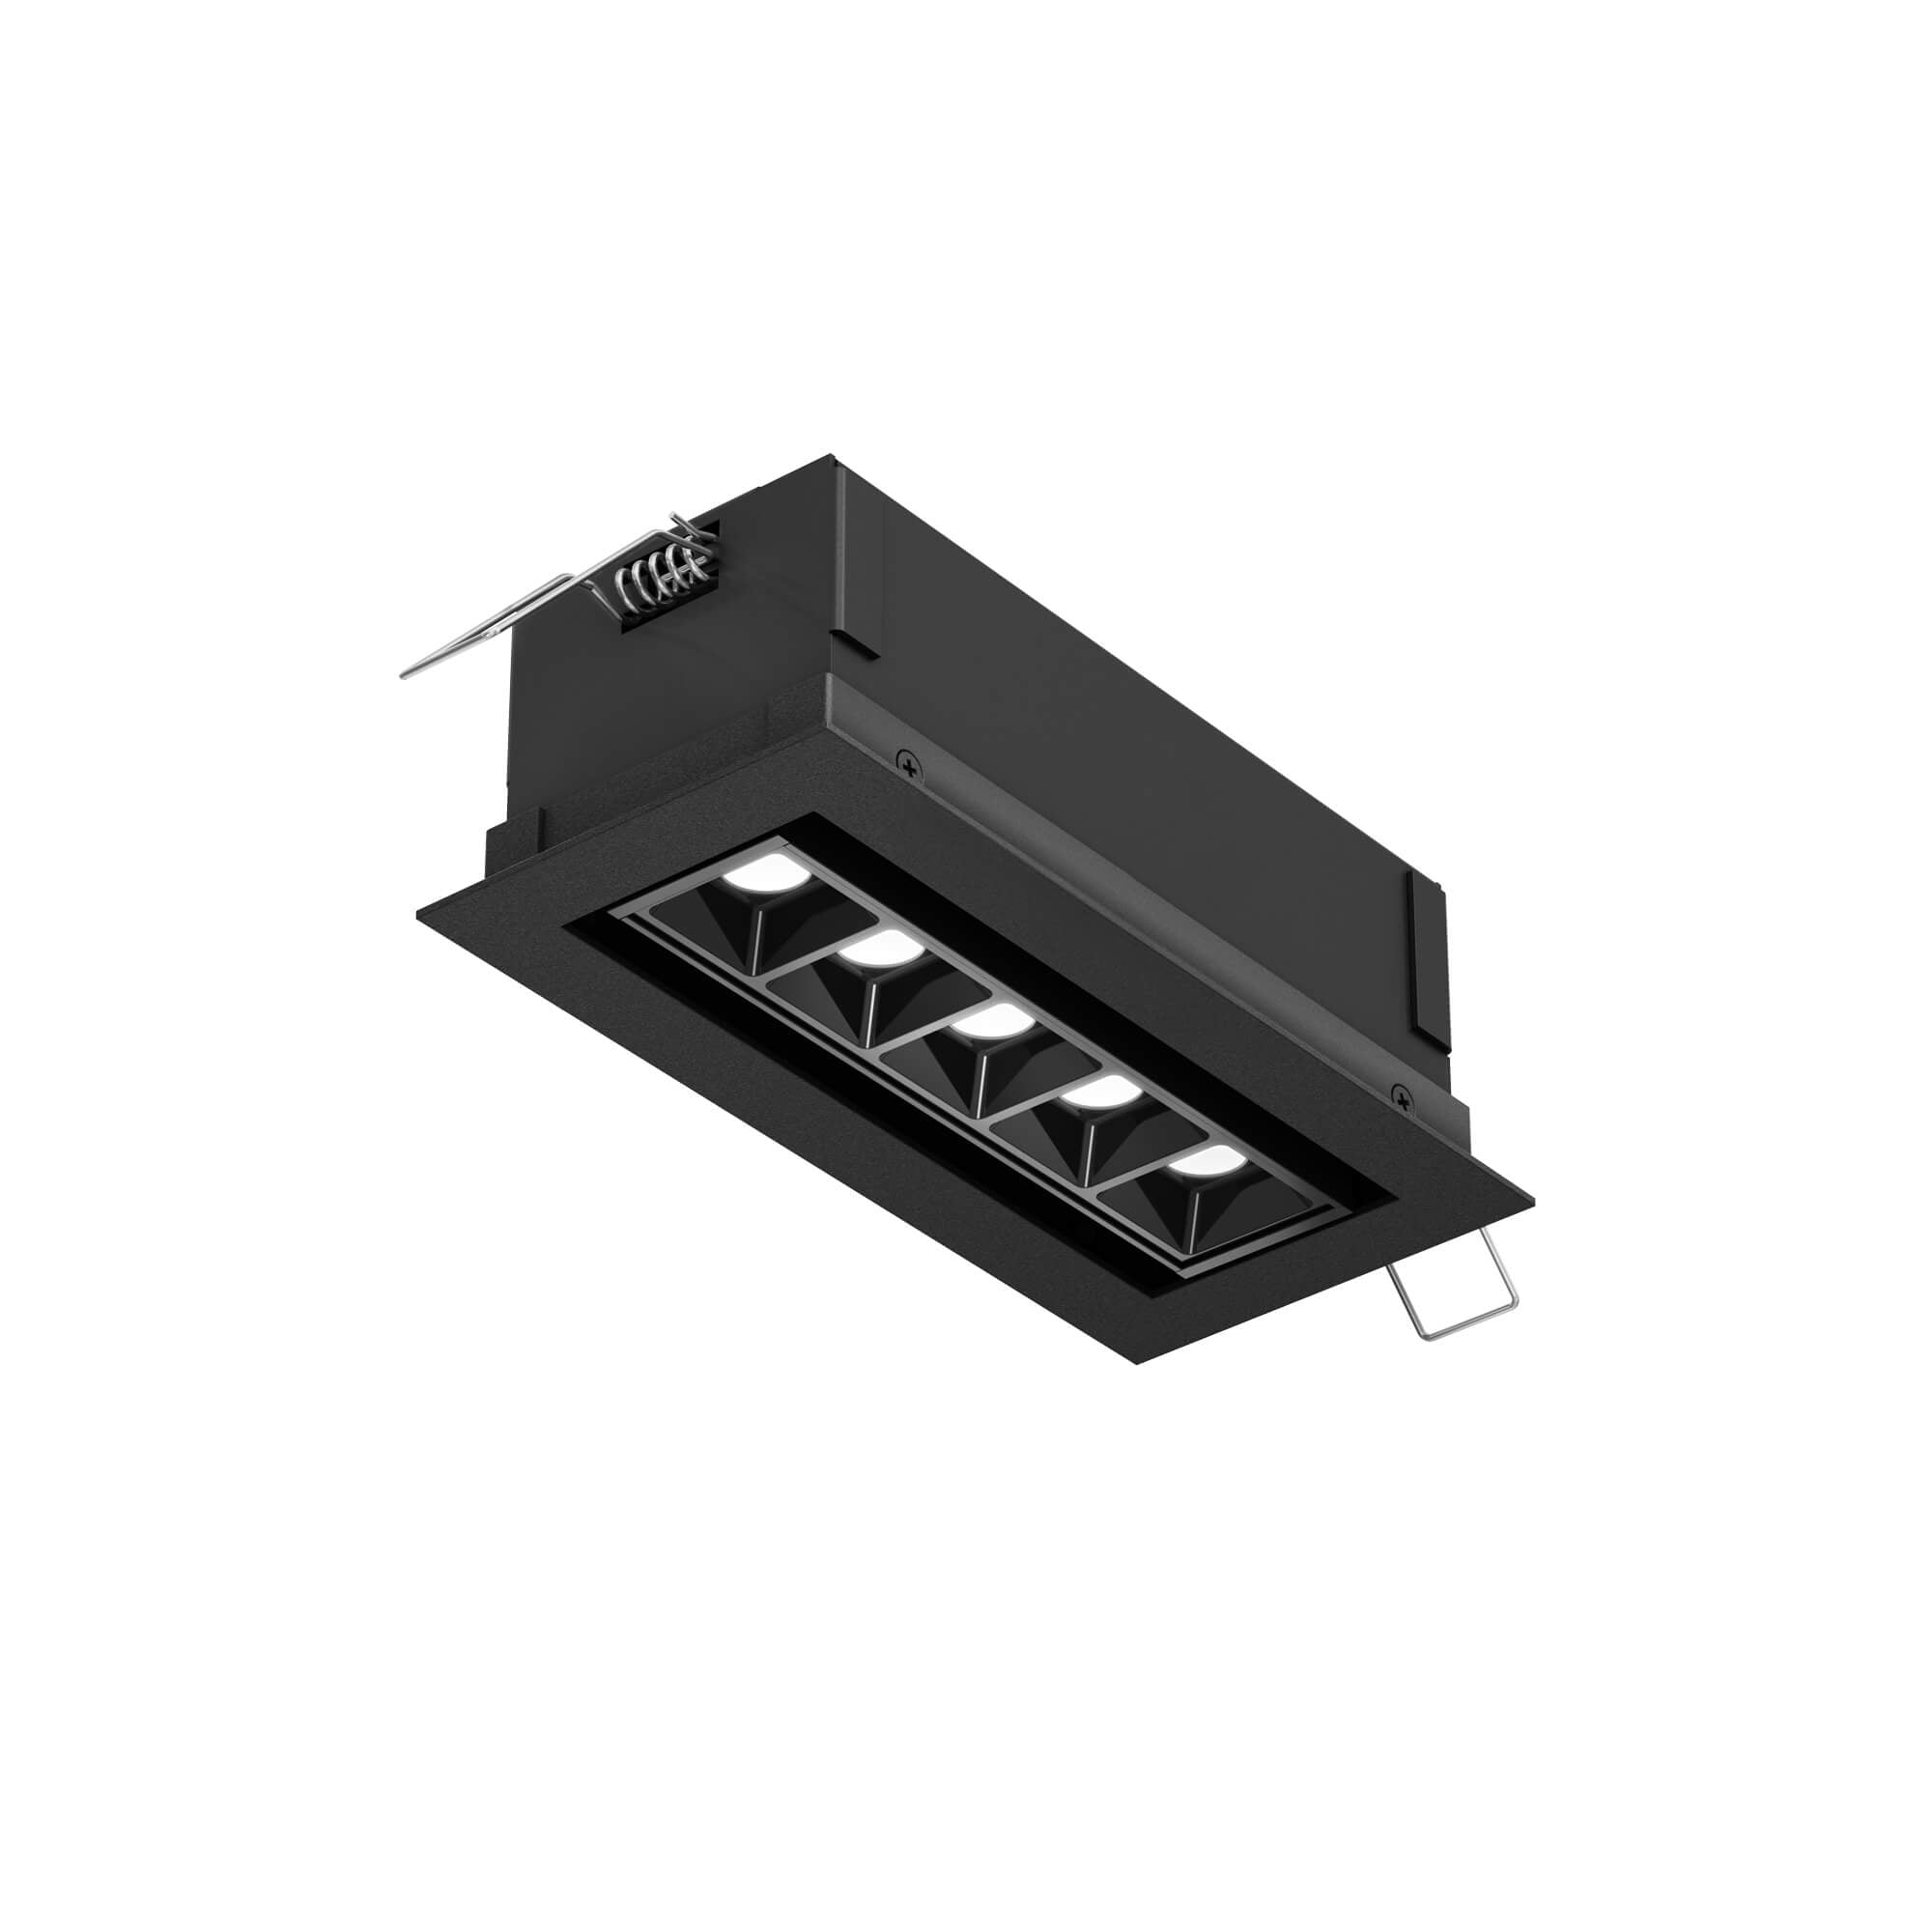 PINPOINT Recessed lighting Black INTEGRATED LED - MSL5G-CC-BK | DALS